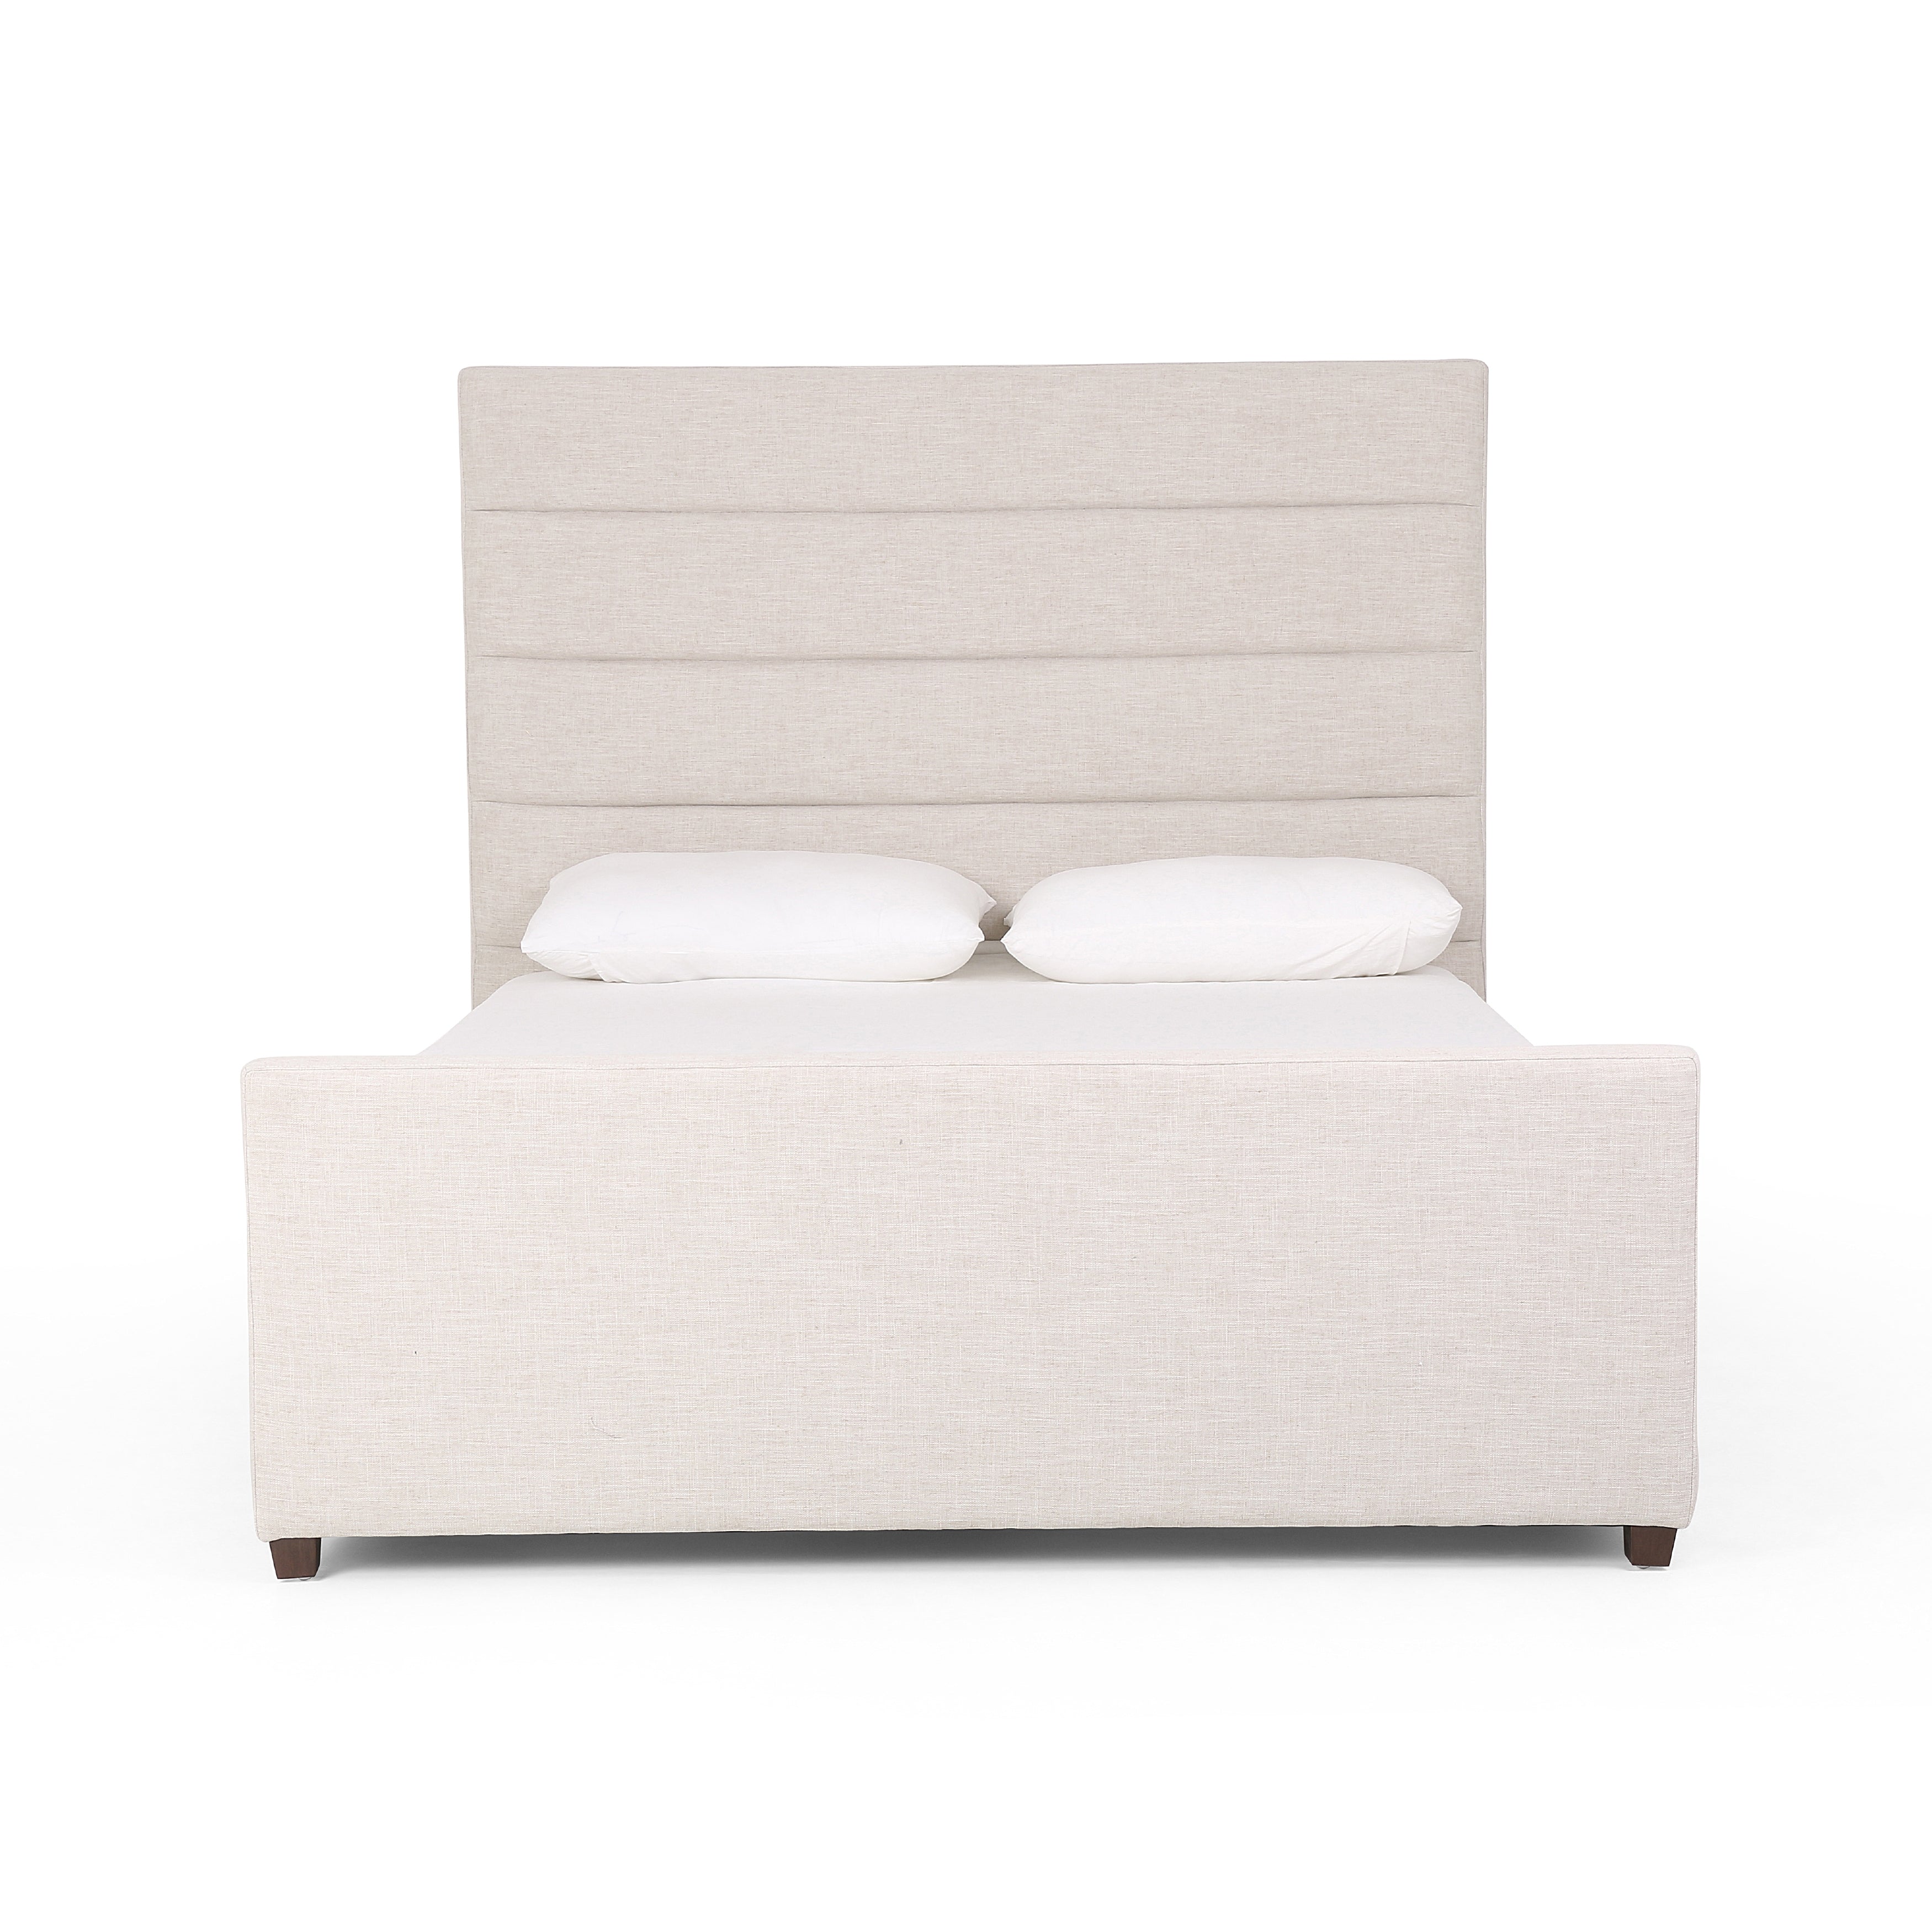 We love the tall, elegant look of this Daphne Bed - Cambric Ivory. Horizontal channeling lends a linear, textured look to luxurious performance-grade upholstery - sure to elevate the look of any bedroom!  Overall Queen Dimensions: 66.75"w x 89.50"d x 59.00"h Overall King Dimensions: 83.00"w x 89.50"d x 59.00"h